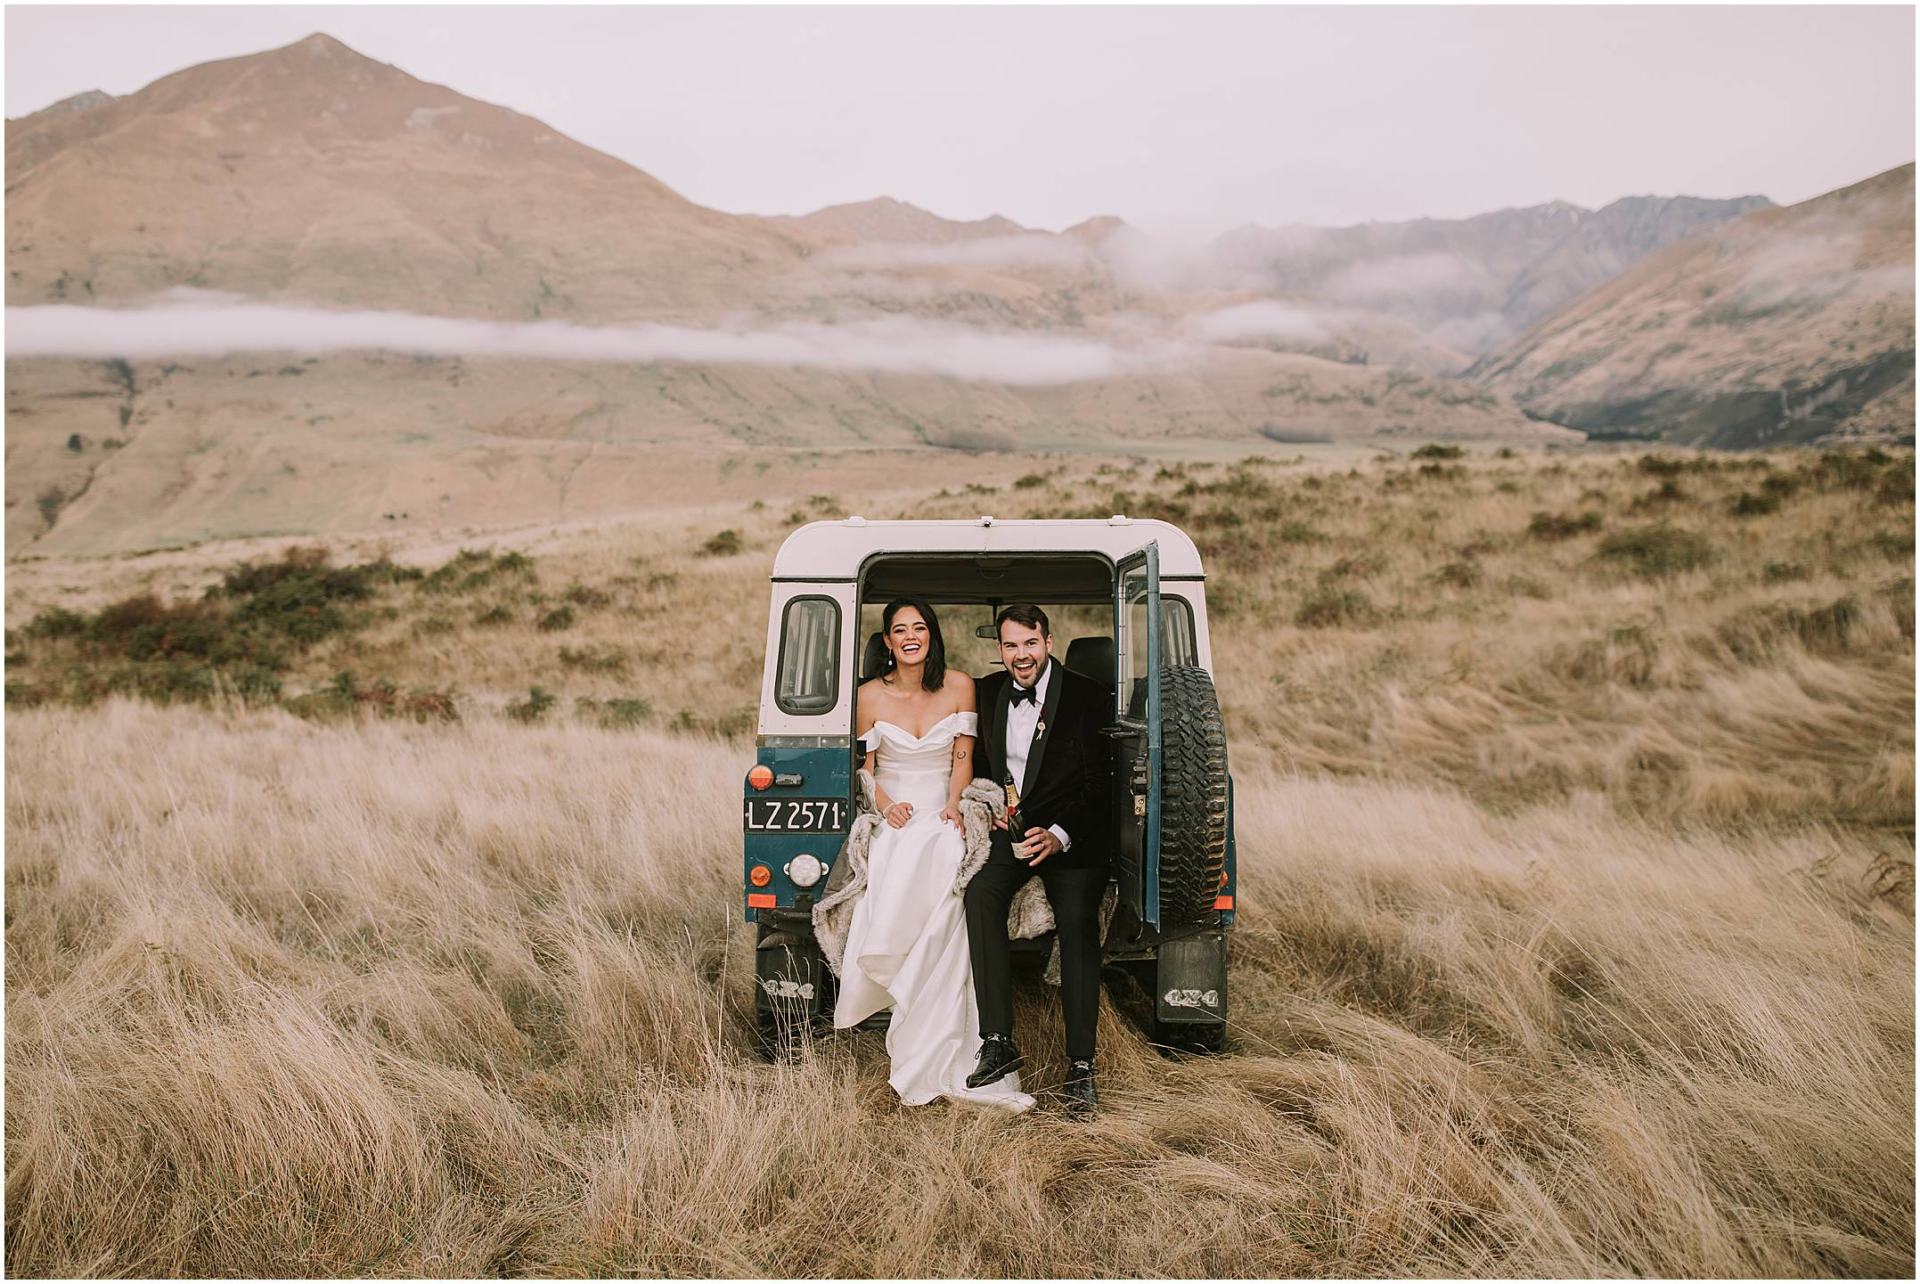 Charlotte Kiri Photography - Elopement Photography with the bride and groom sitting side by side laughing in the back of a Land Rover, that has been parked in a field of long grass in front of a backdrop of mountains and low hanging clouds in Wanaka, New Zealand